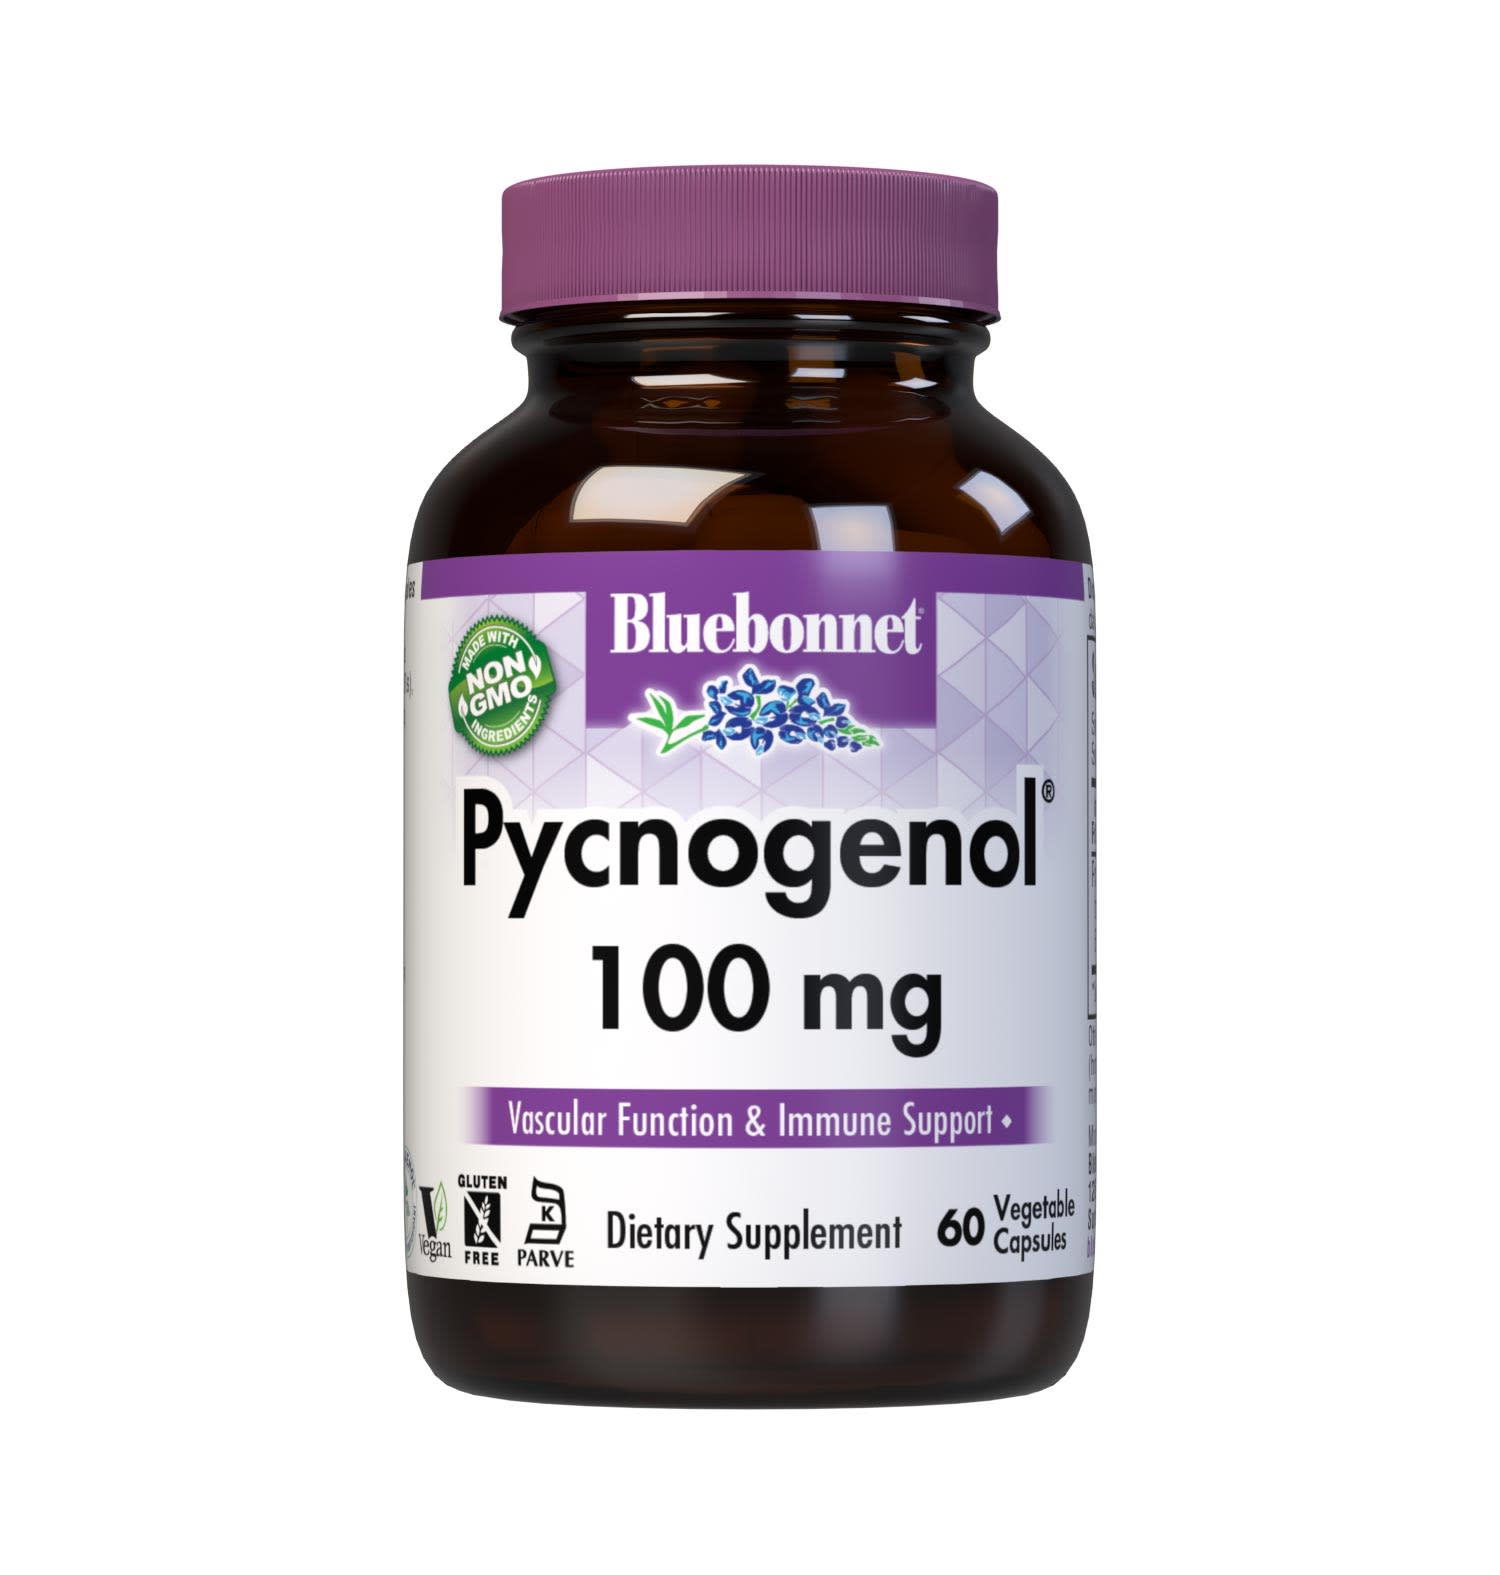 Bluebonnet’s Pycnogenol 100 mg 60 Vegetable Capsules are derived from the bark of the European coastal pine, Pinus maritima. Pycnogenol is a plant extract concentrated with oligomeric proanthocyanidins (OPCs), a water-soluble bioflavonoid. Pycnogenol may help support vascular and immune function. #size_60 count